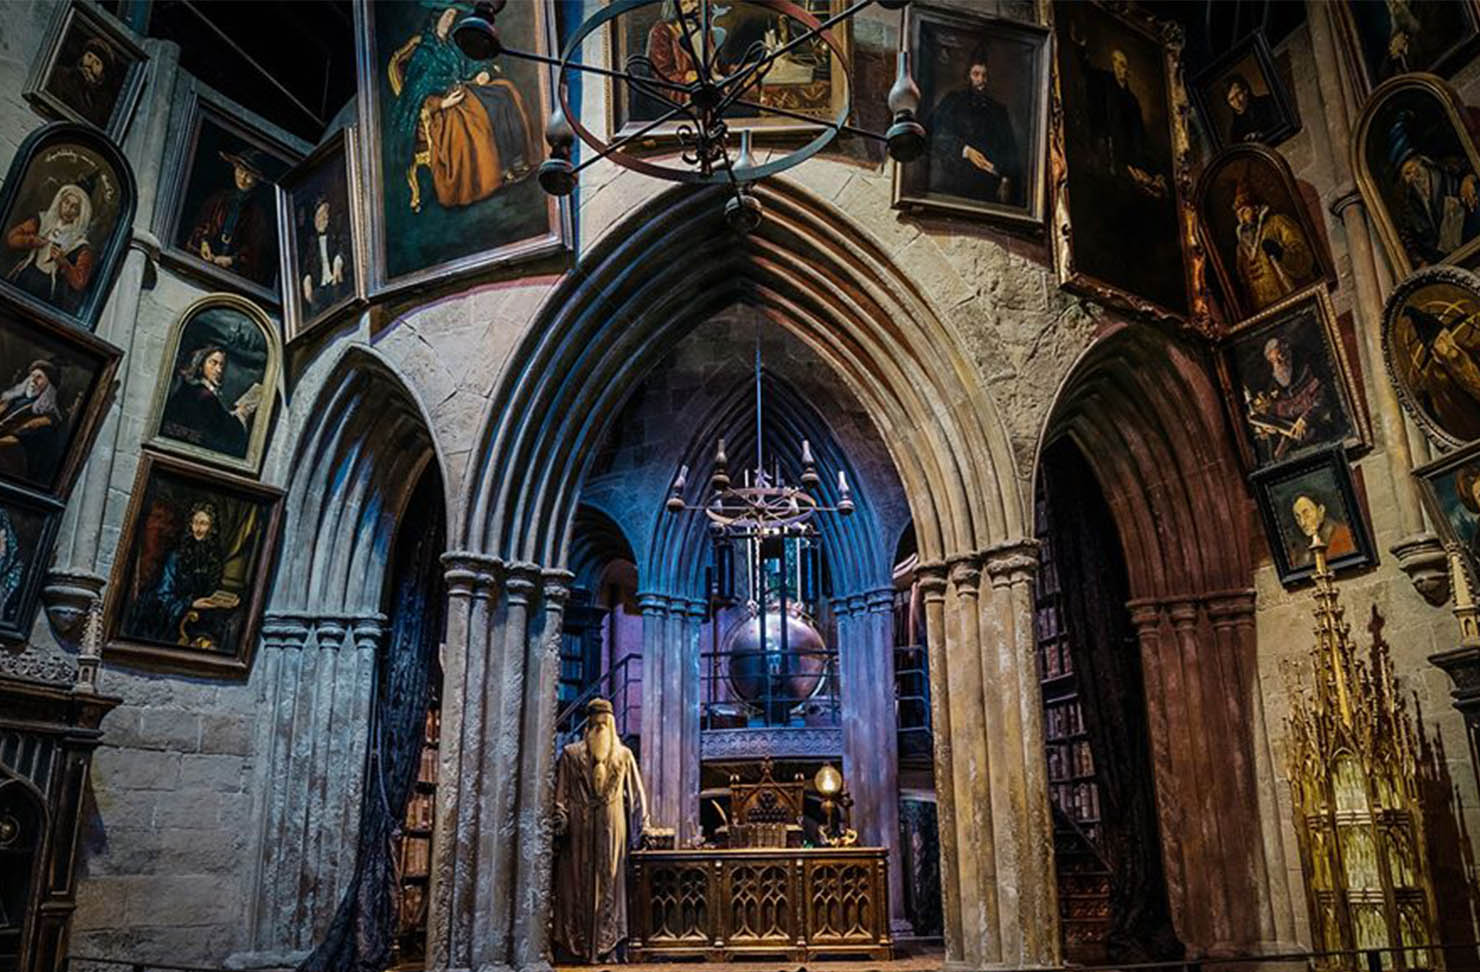 inside dumbledore's office on the harry potter studio tour in london